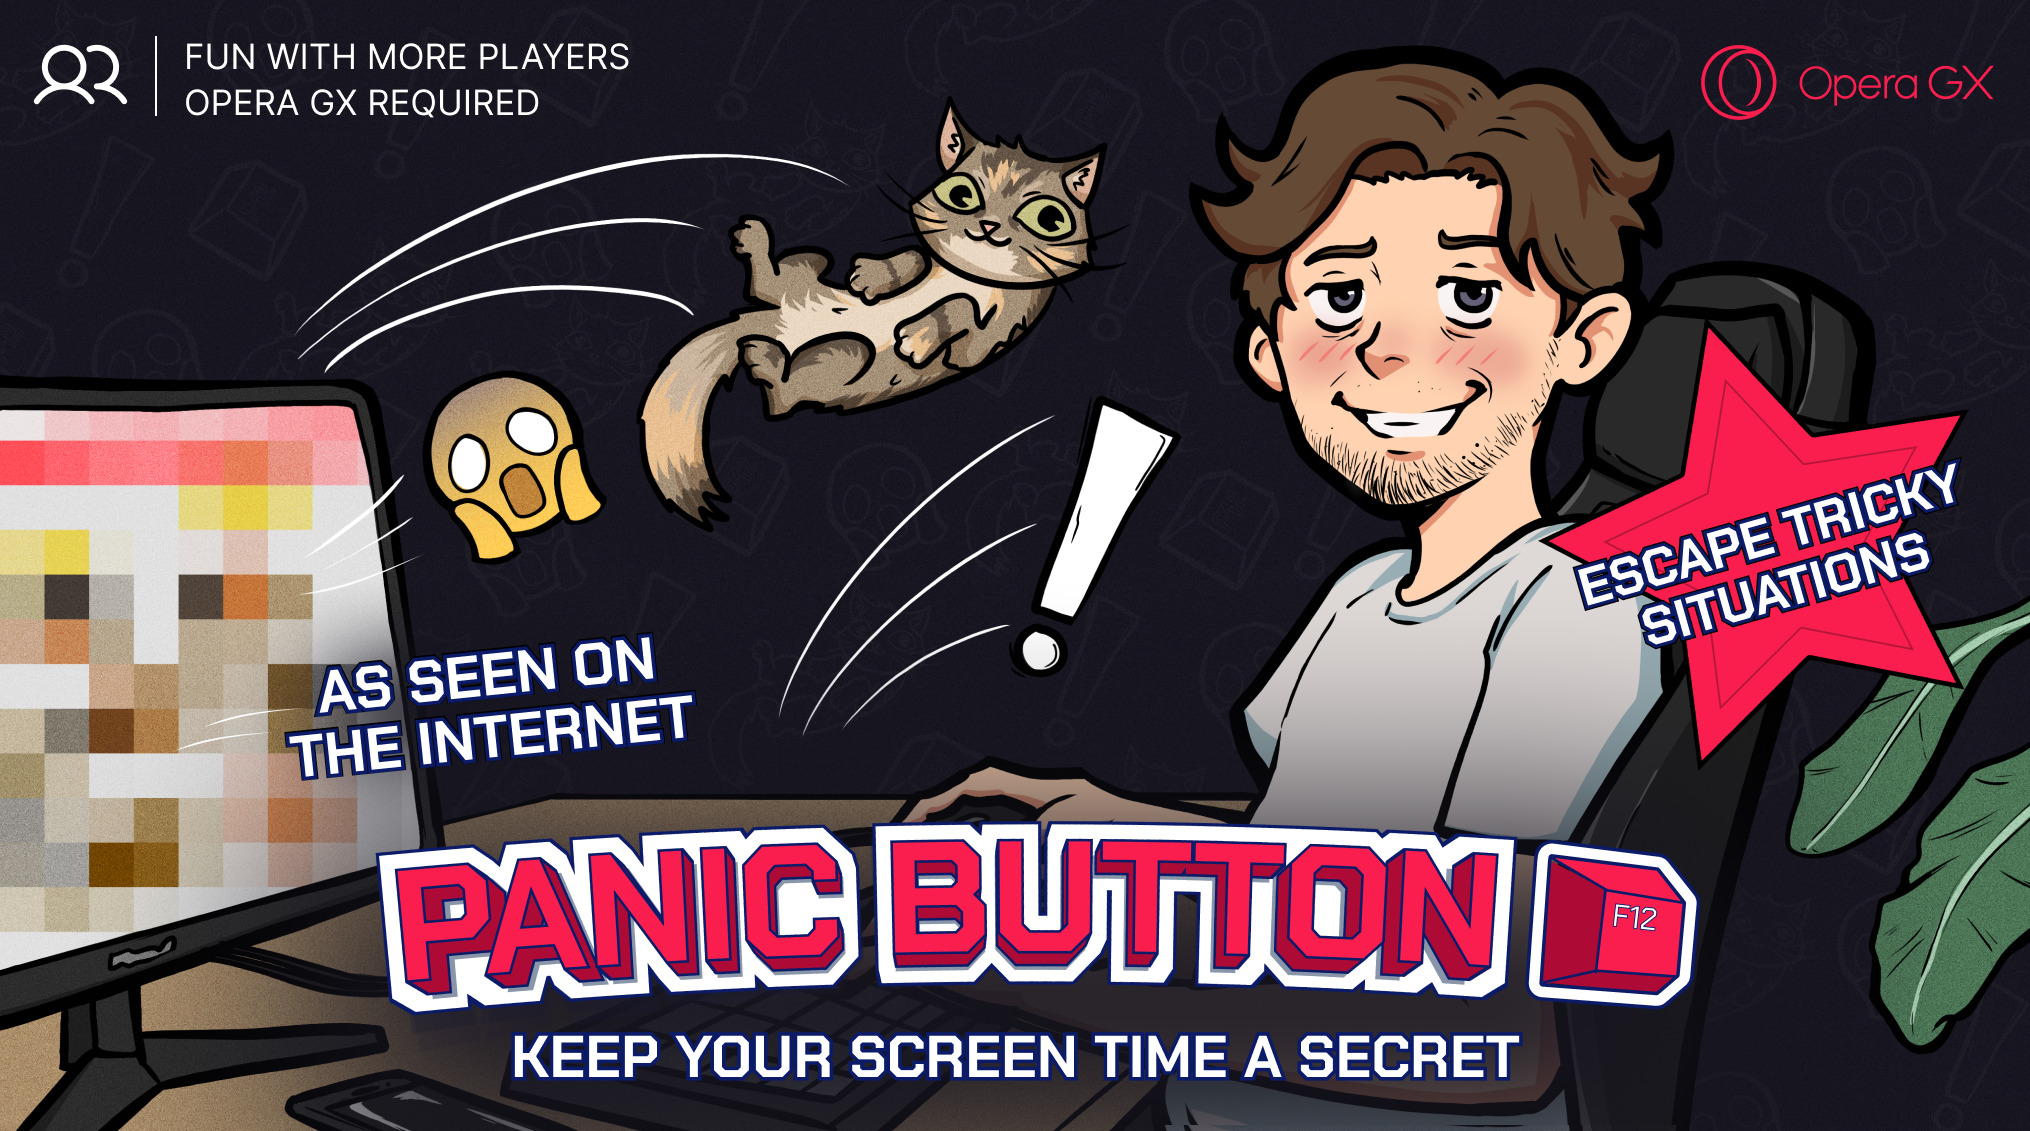 Escape tricky situations with the Panic Button!